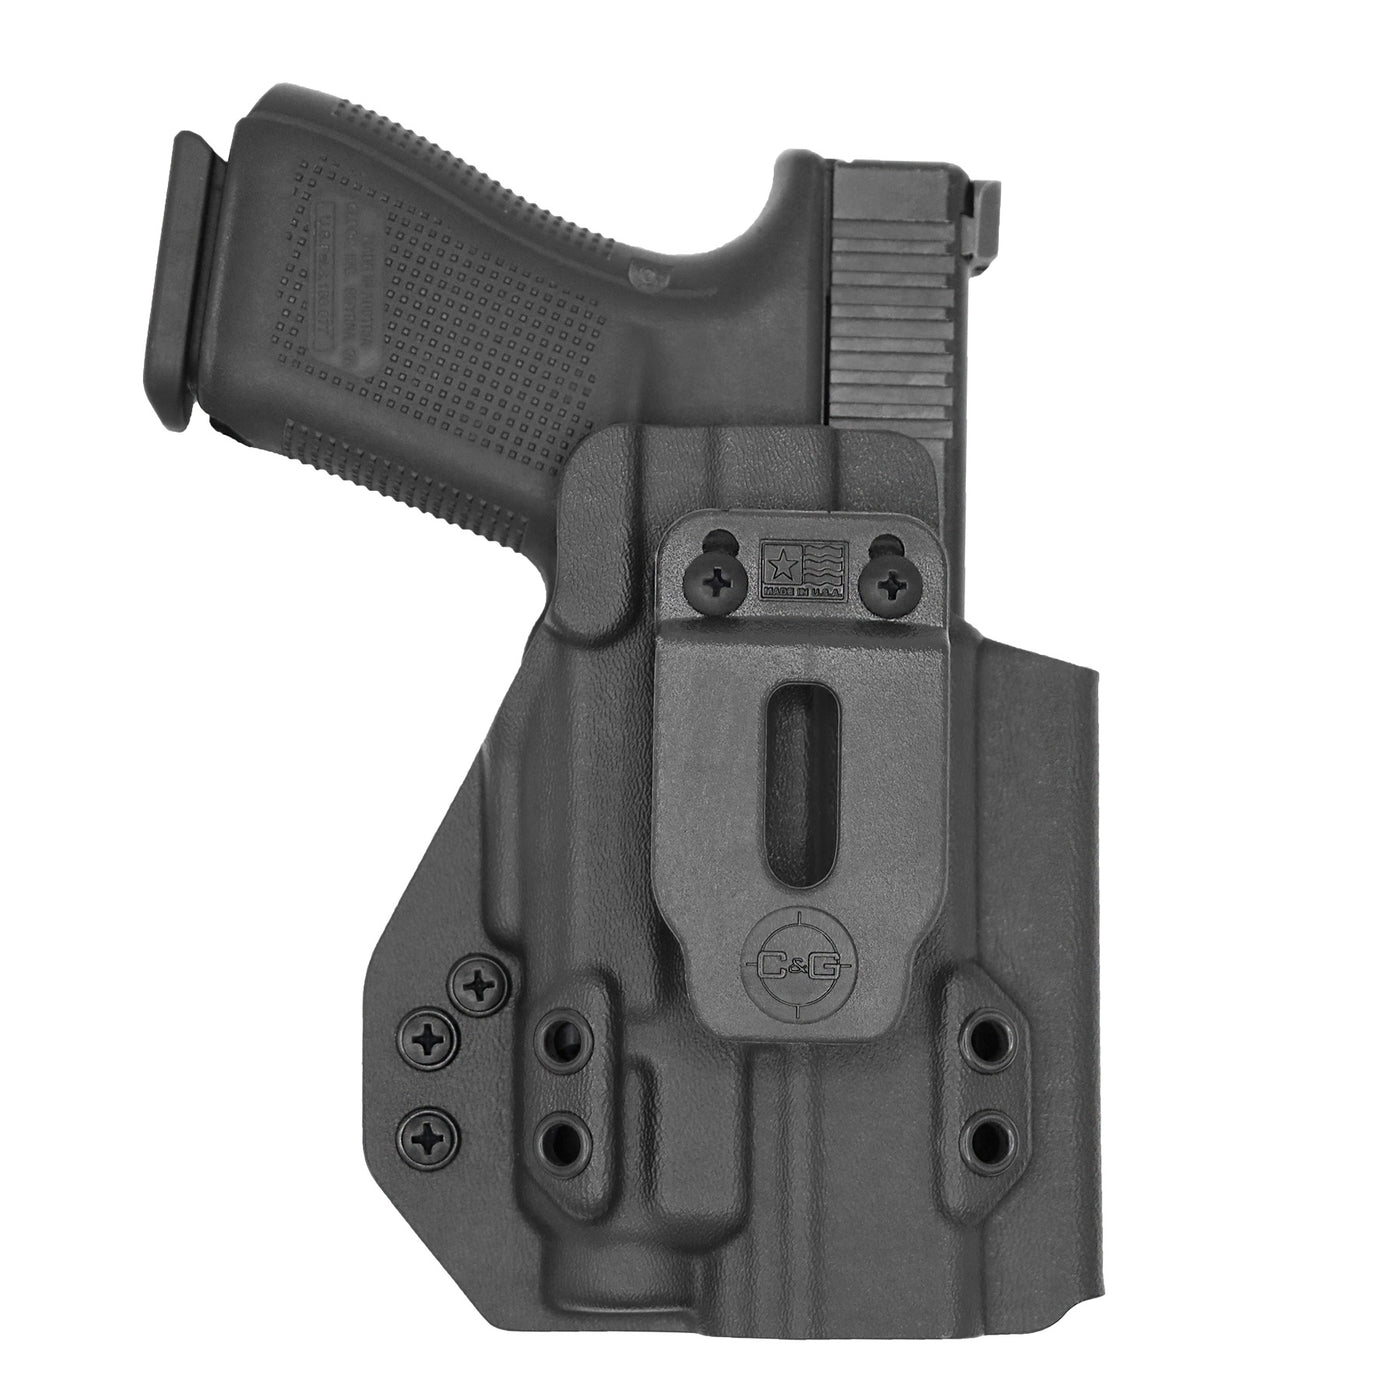 C&G Holsters custom IWB Tactical OZ9/c streamlight tlr7/a in holstered position